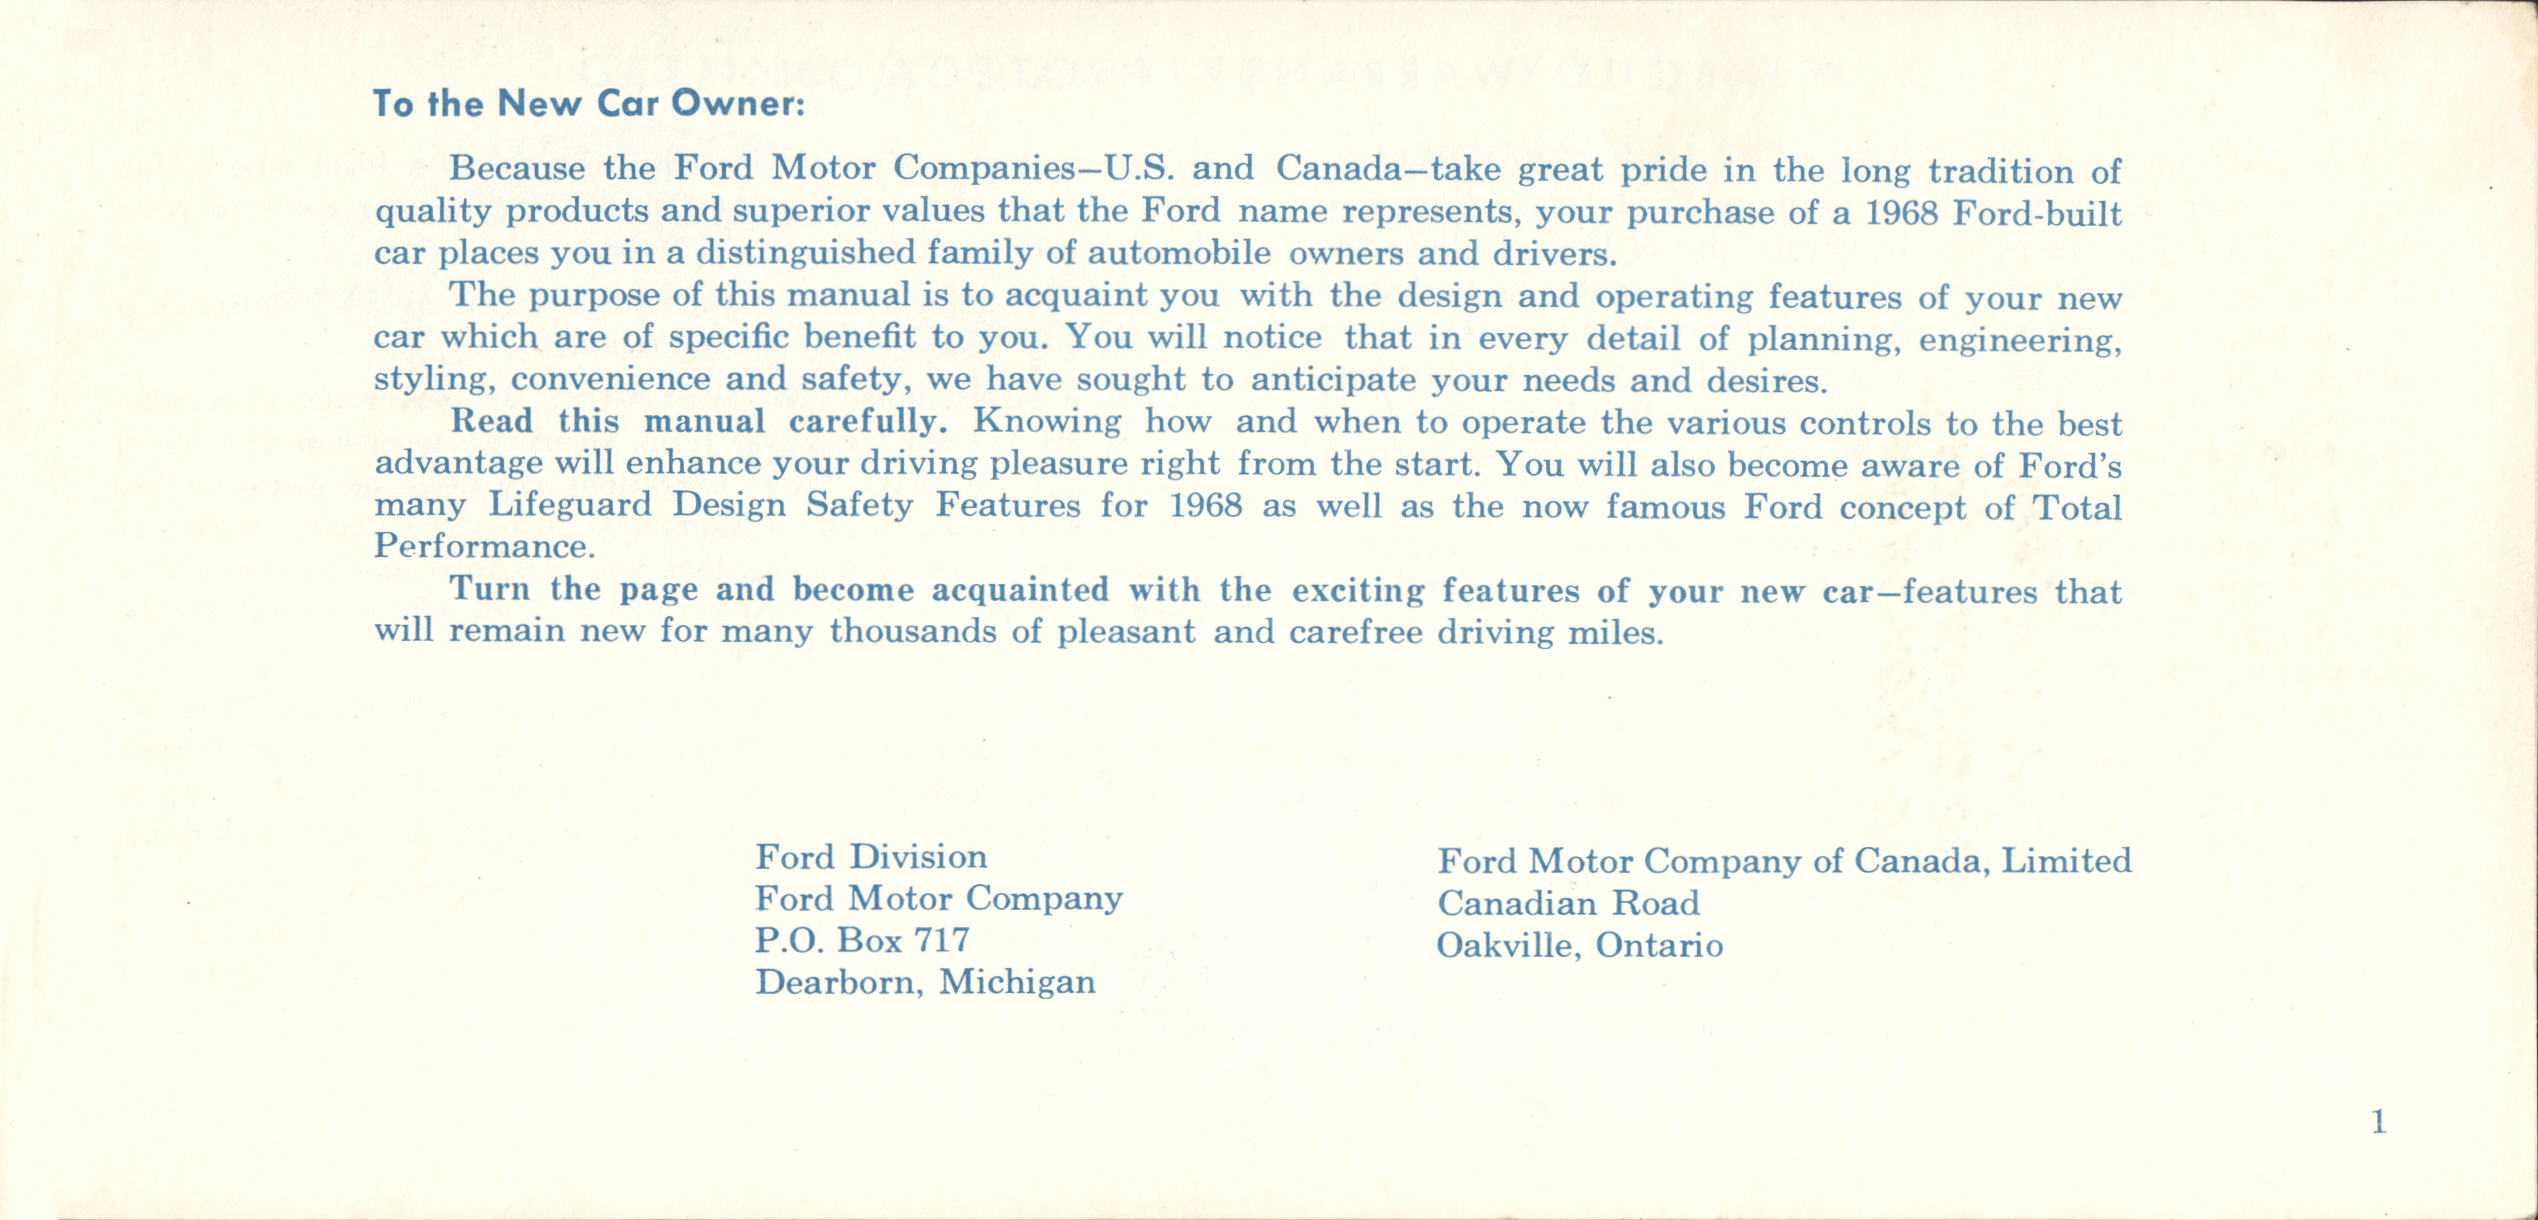 1968_Ford_Fairlane_Owners_Manual-01